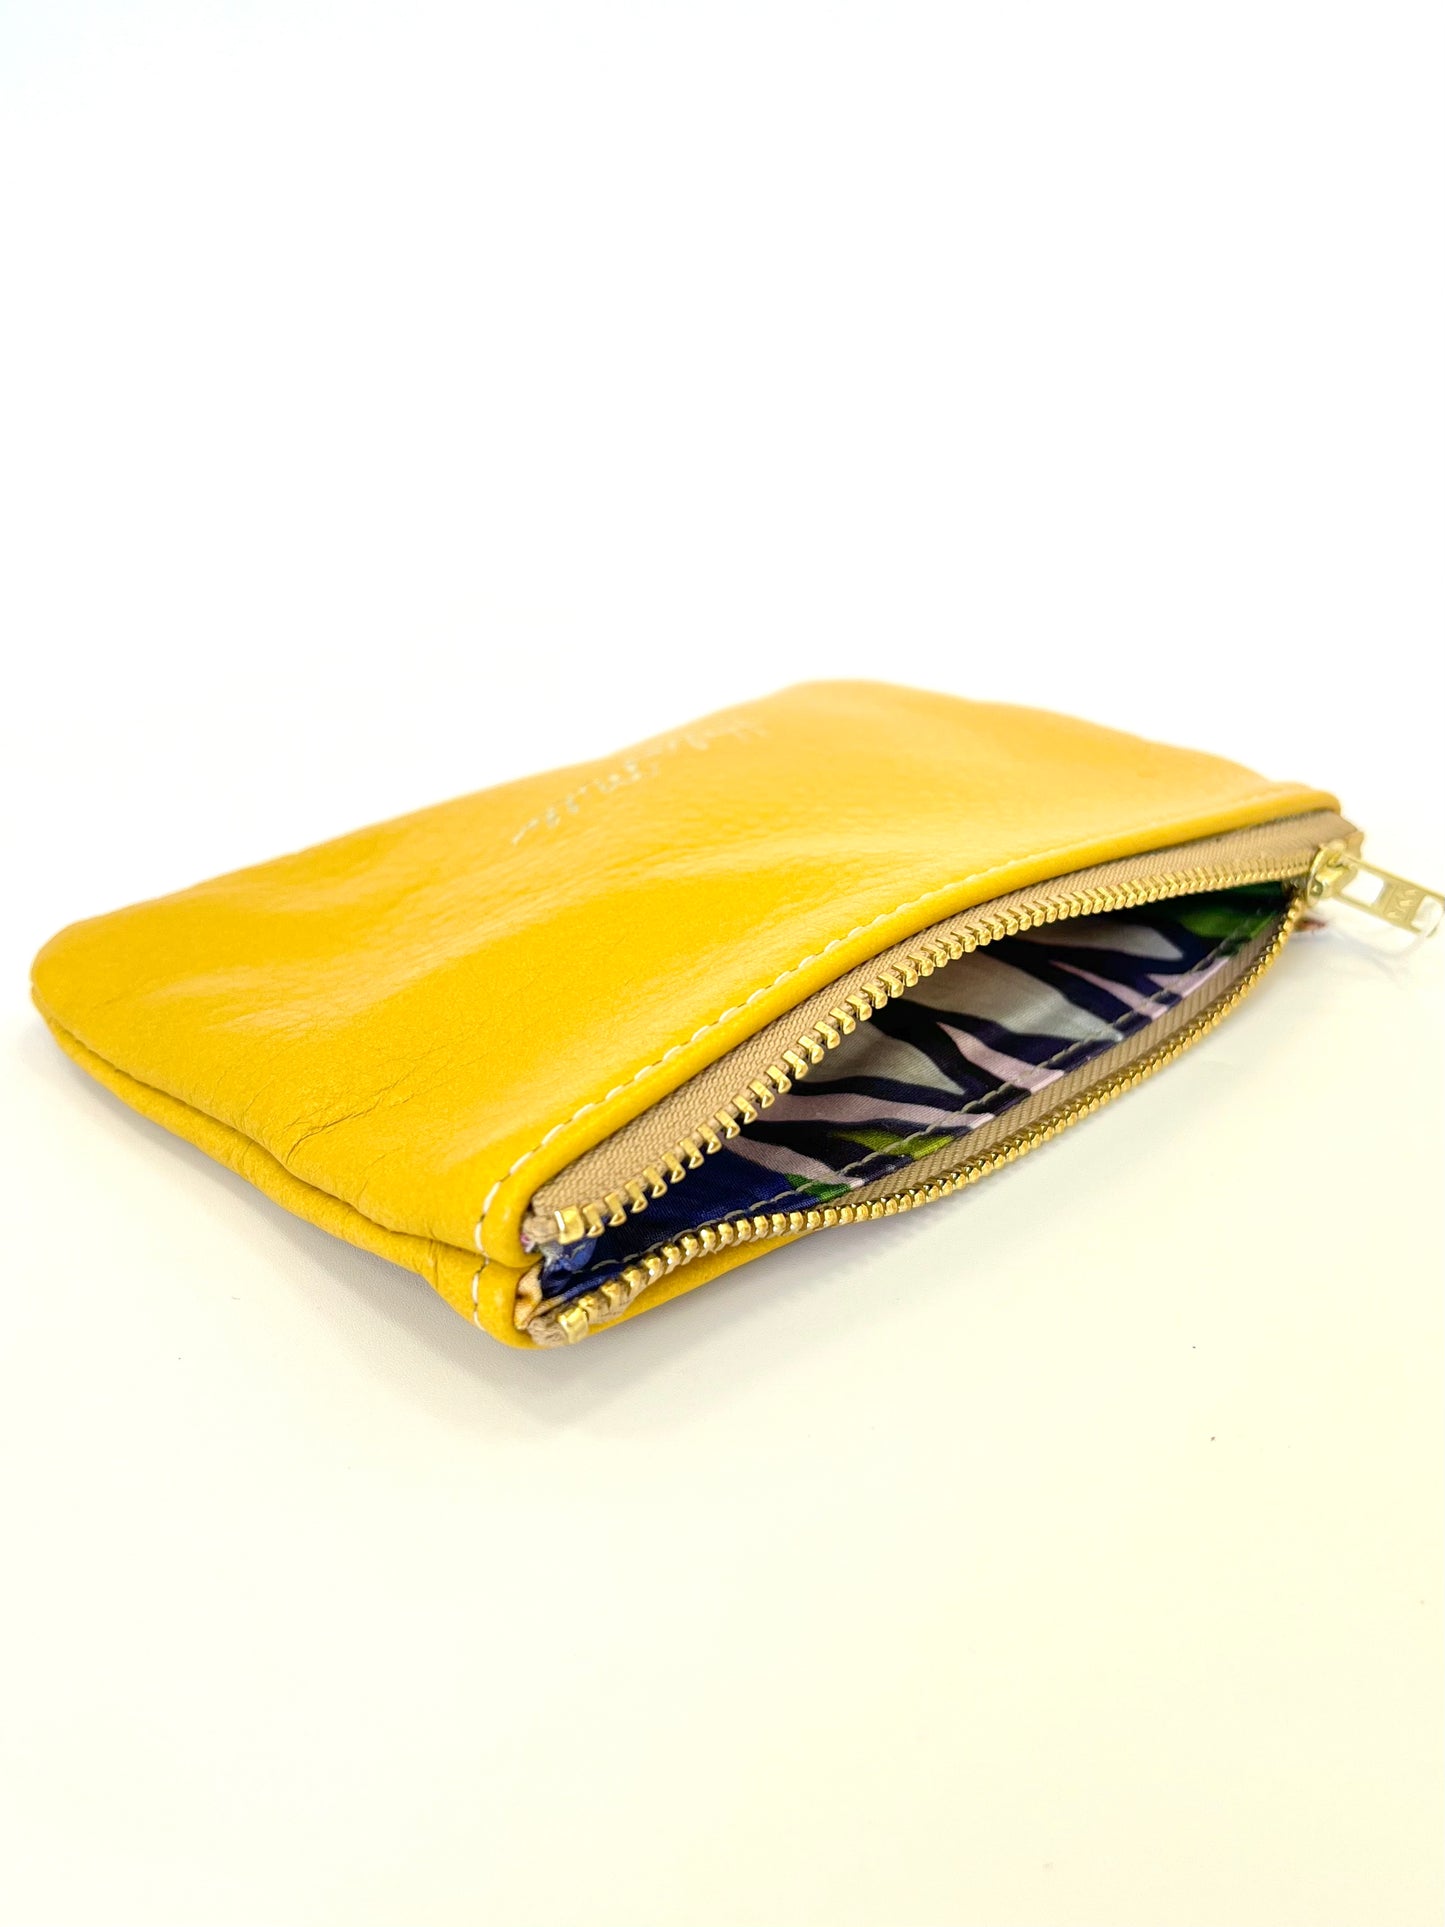 Coin Purse - 15cm - Mustard Leather